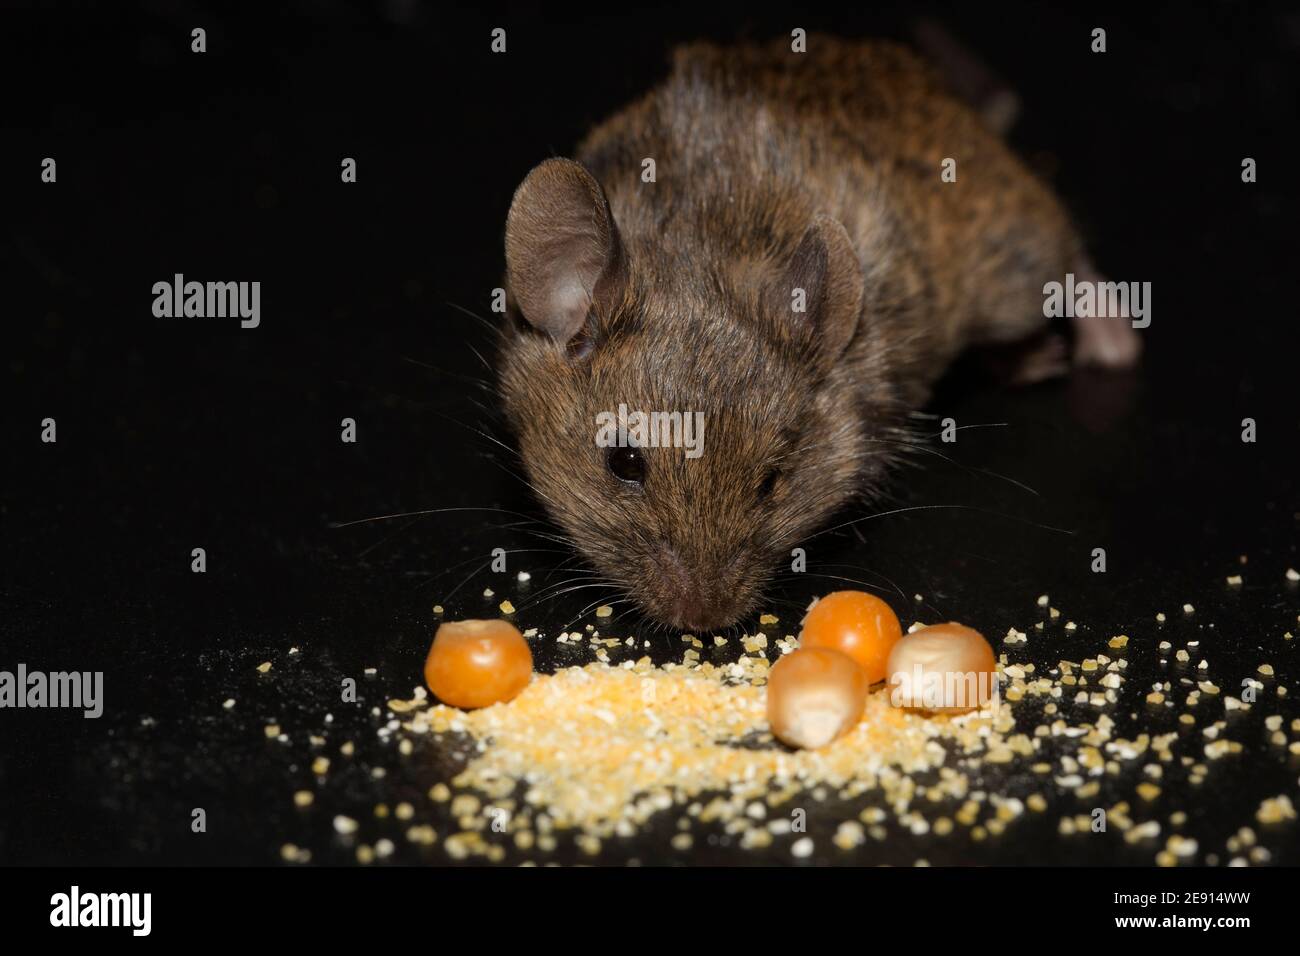 Infestation of mice in a pantry Stock Photo